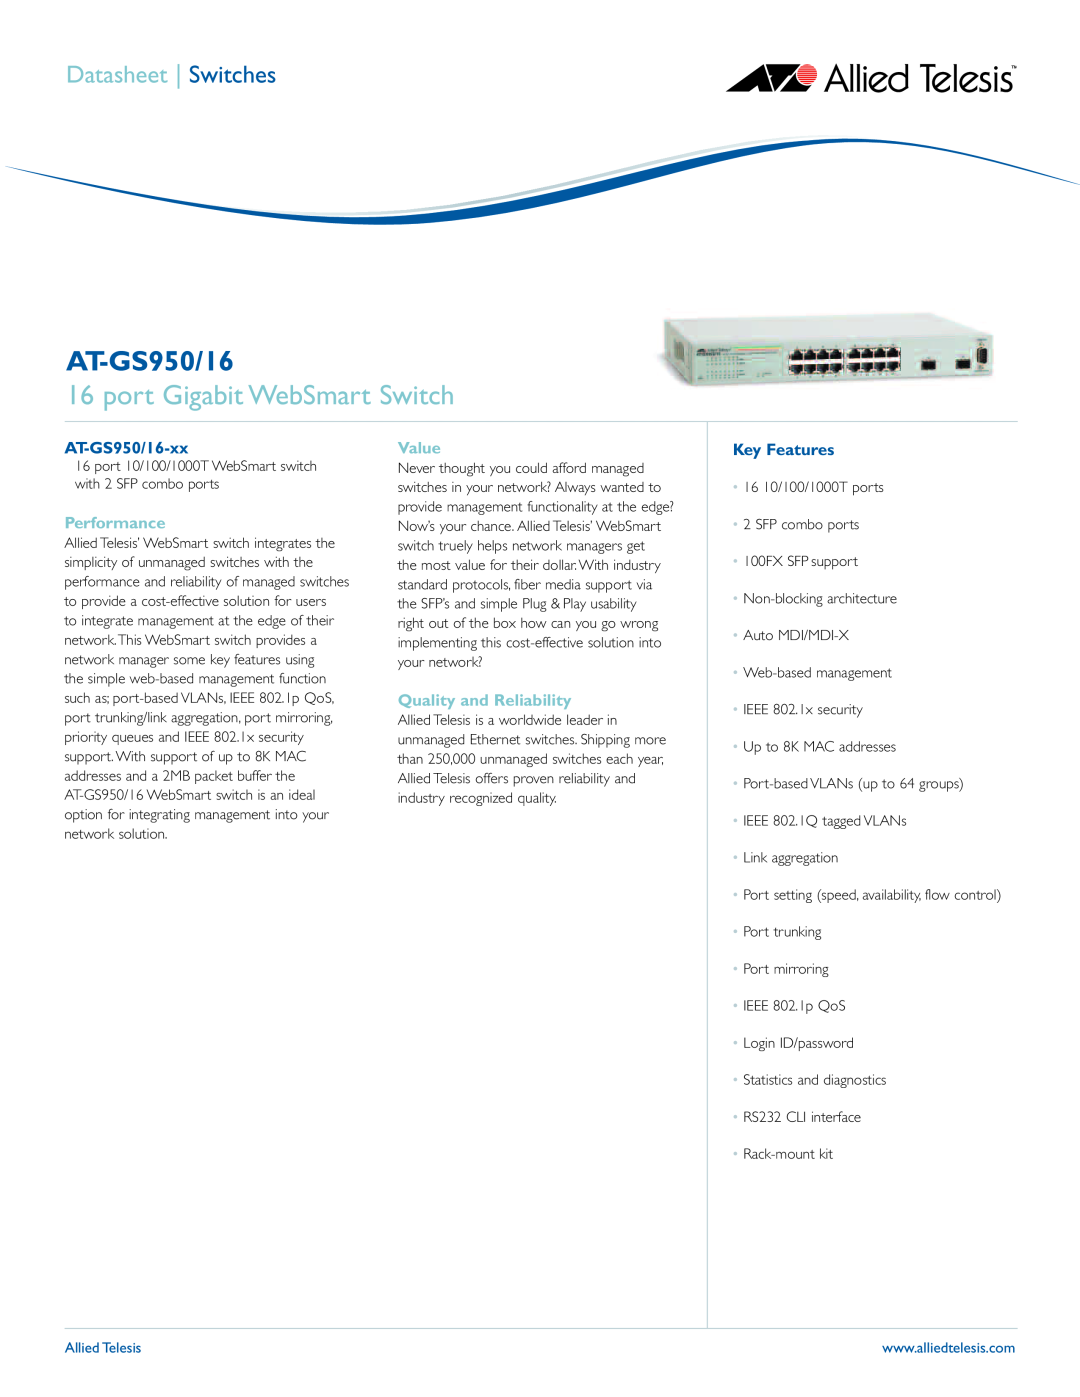 Allied Telesis AT-GS950/24 manual port Gigabit WebSmart Switch, AT-GS950/16-xx, Performance, Value, Key Features 